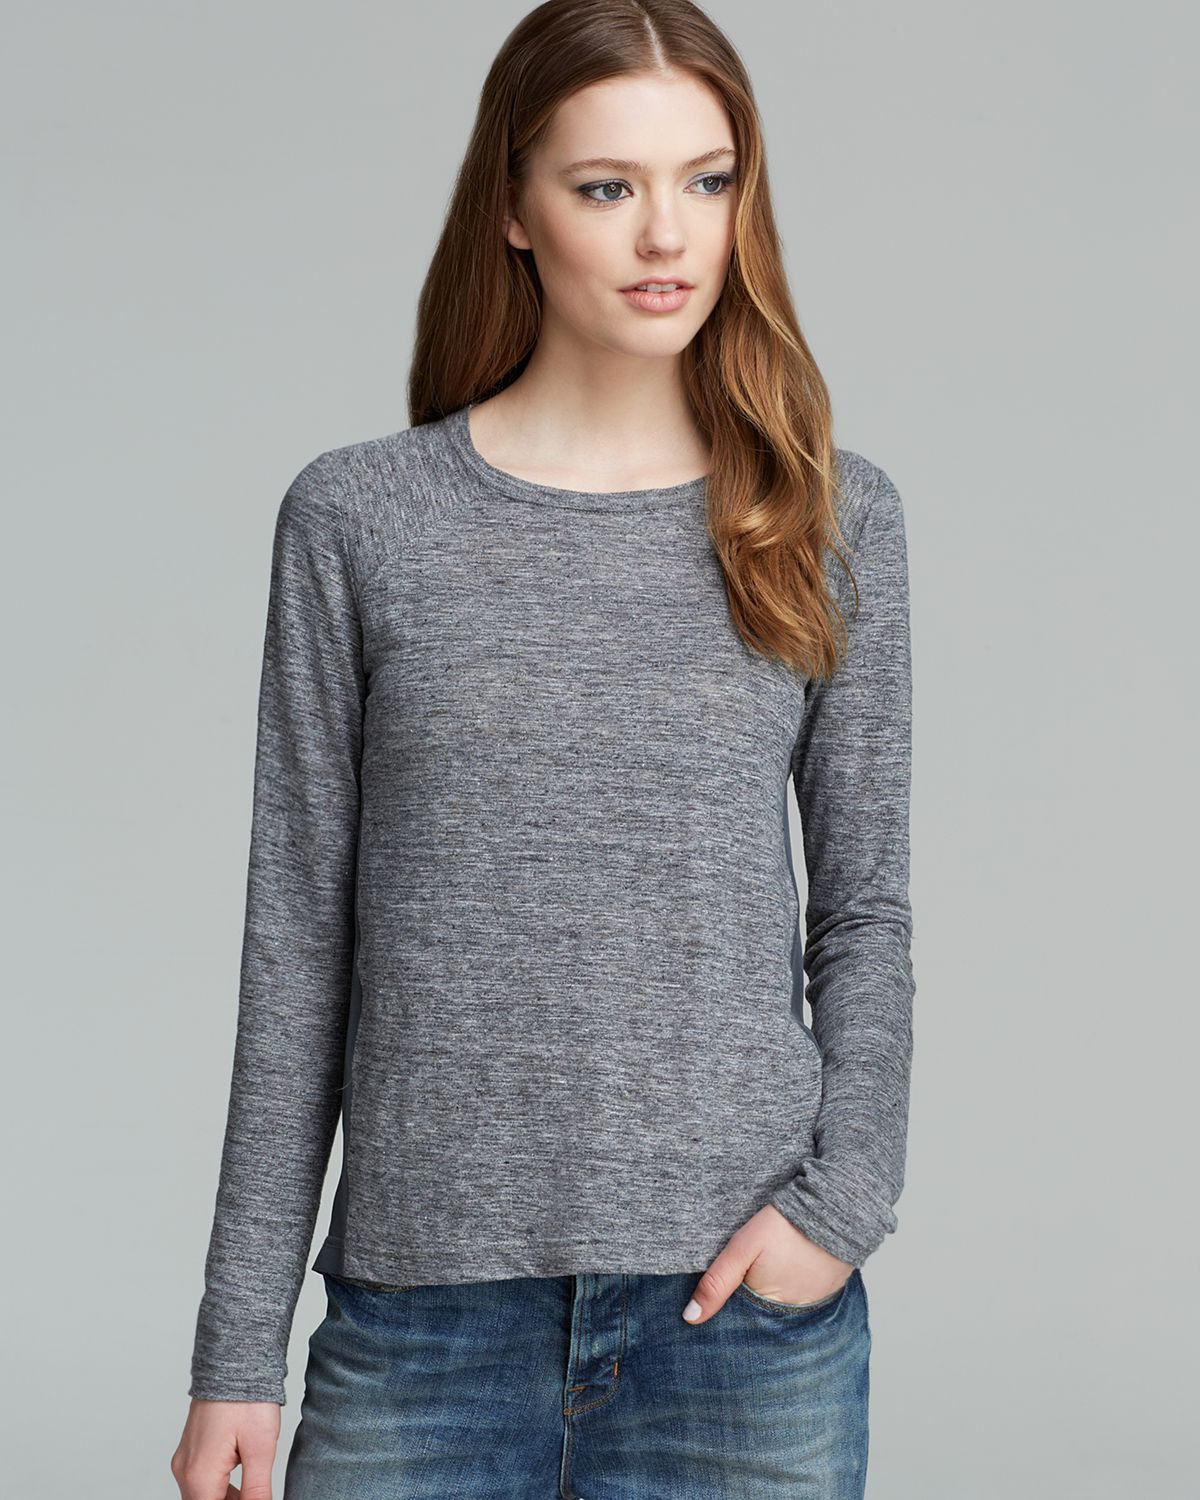 Lyst - Marc By Marc Jacobs Top Carmen Mixed Media in Gray